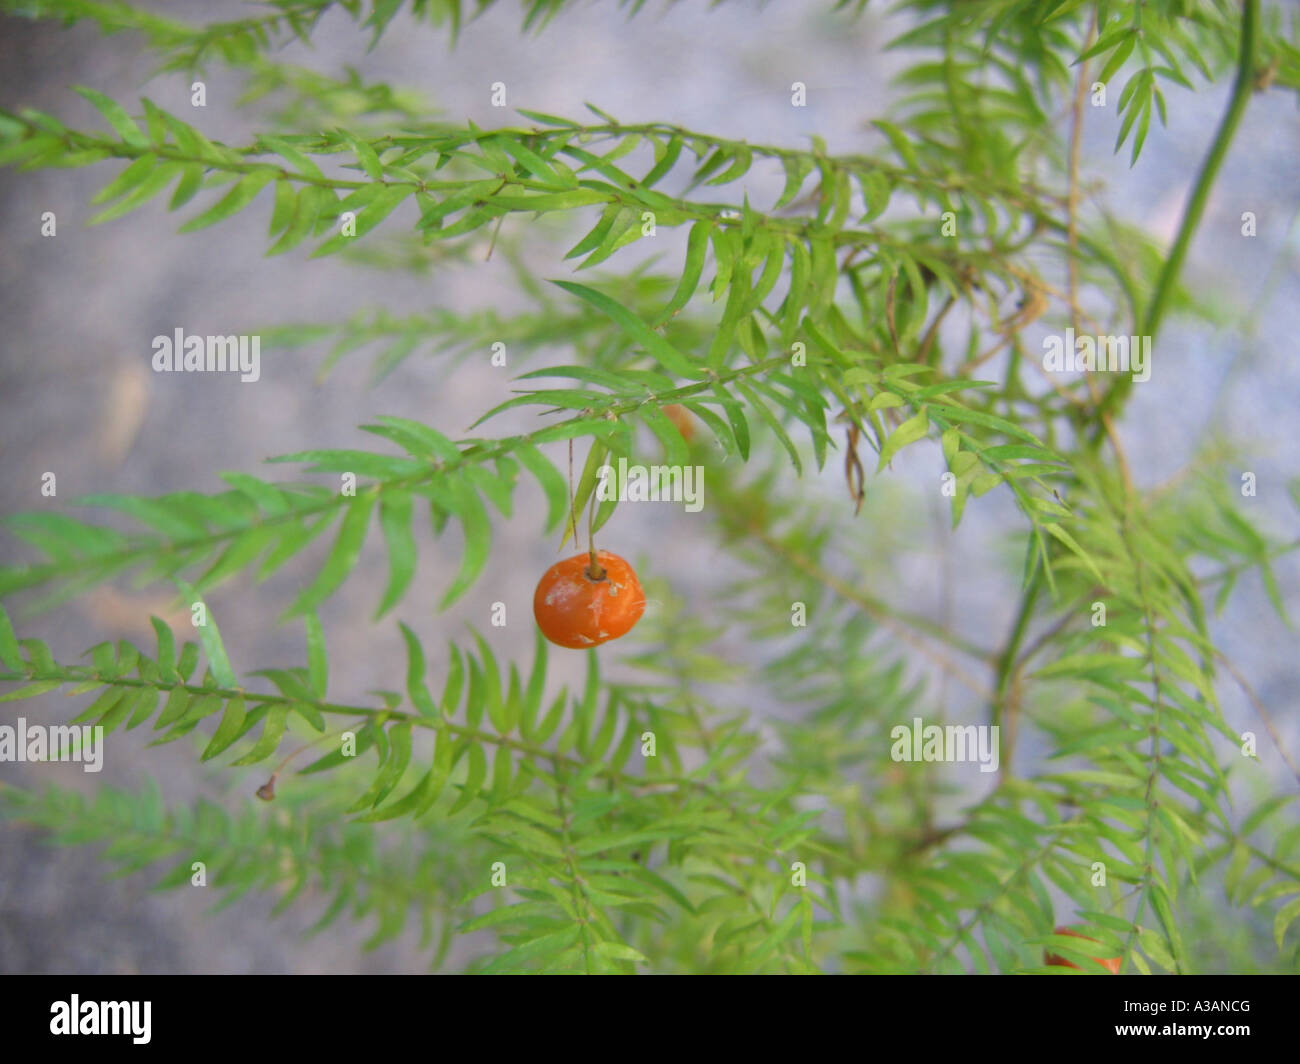 Asparagus fern (Asparagus scandens) with fruit berry Stock Photo